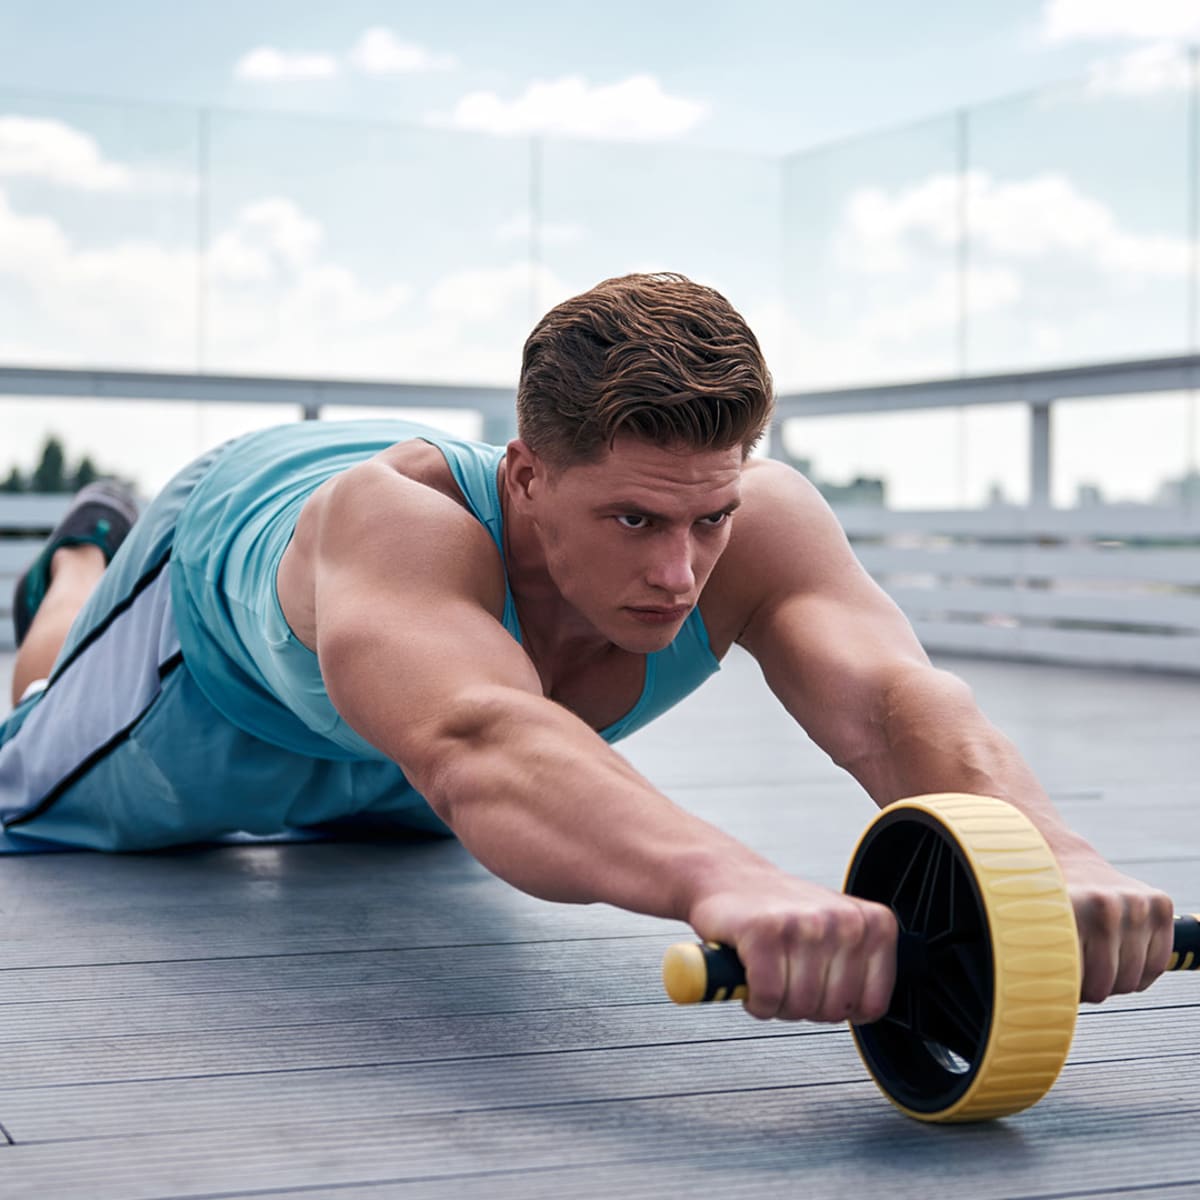 14 Moves That Are More Effective Than Situps - Men's Journal